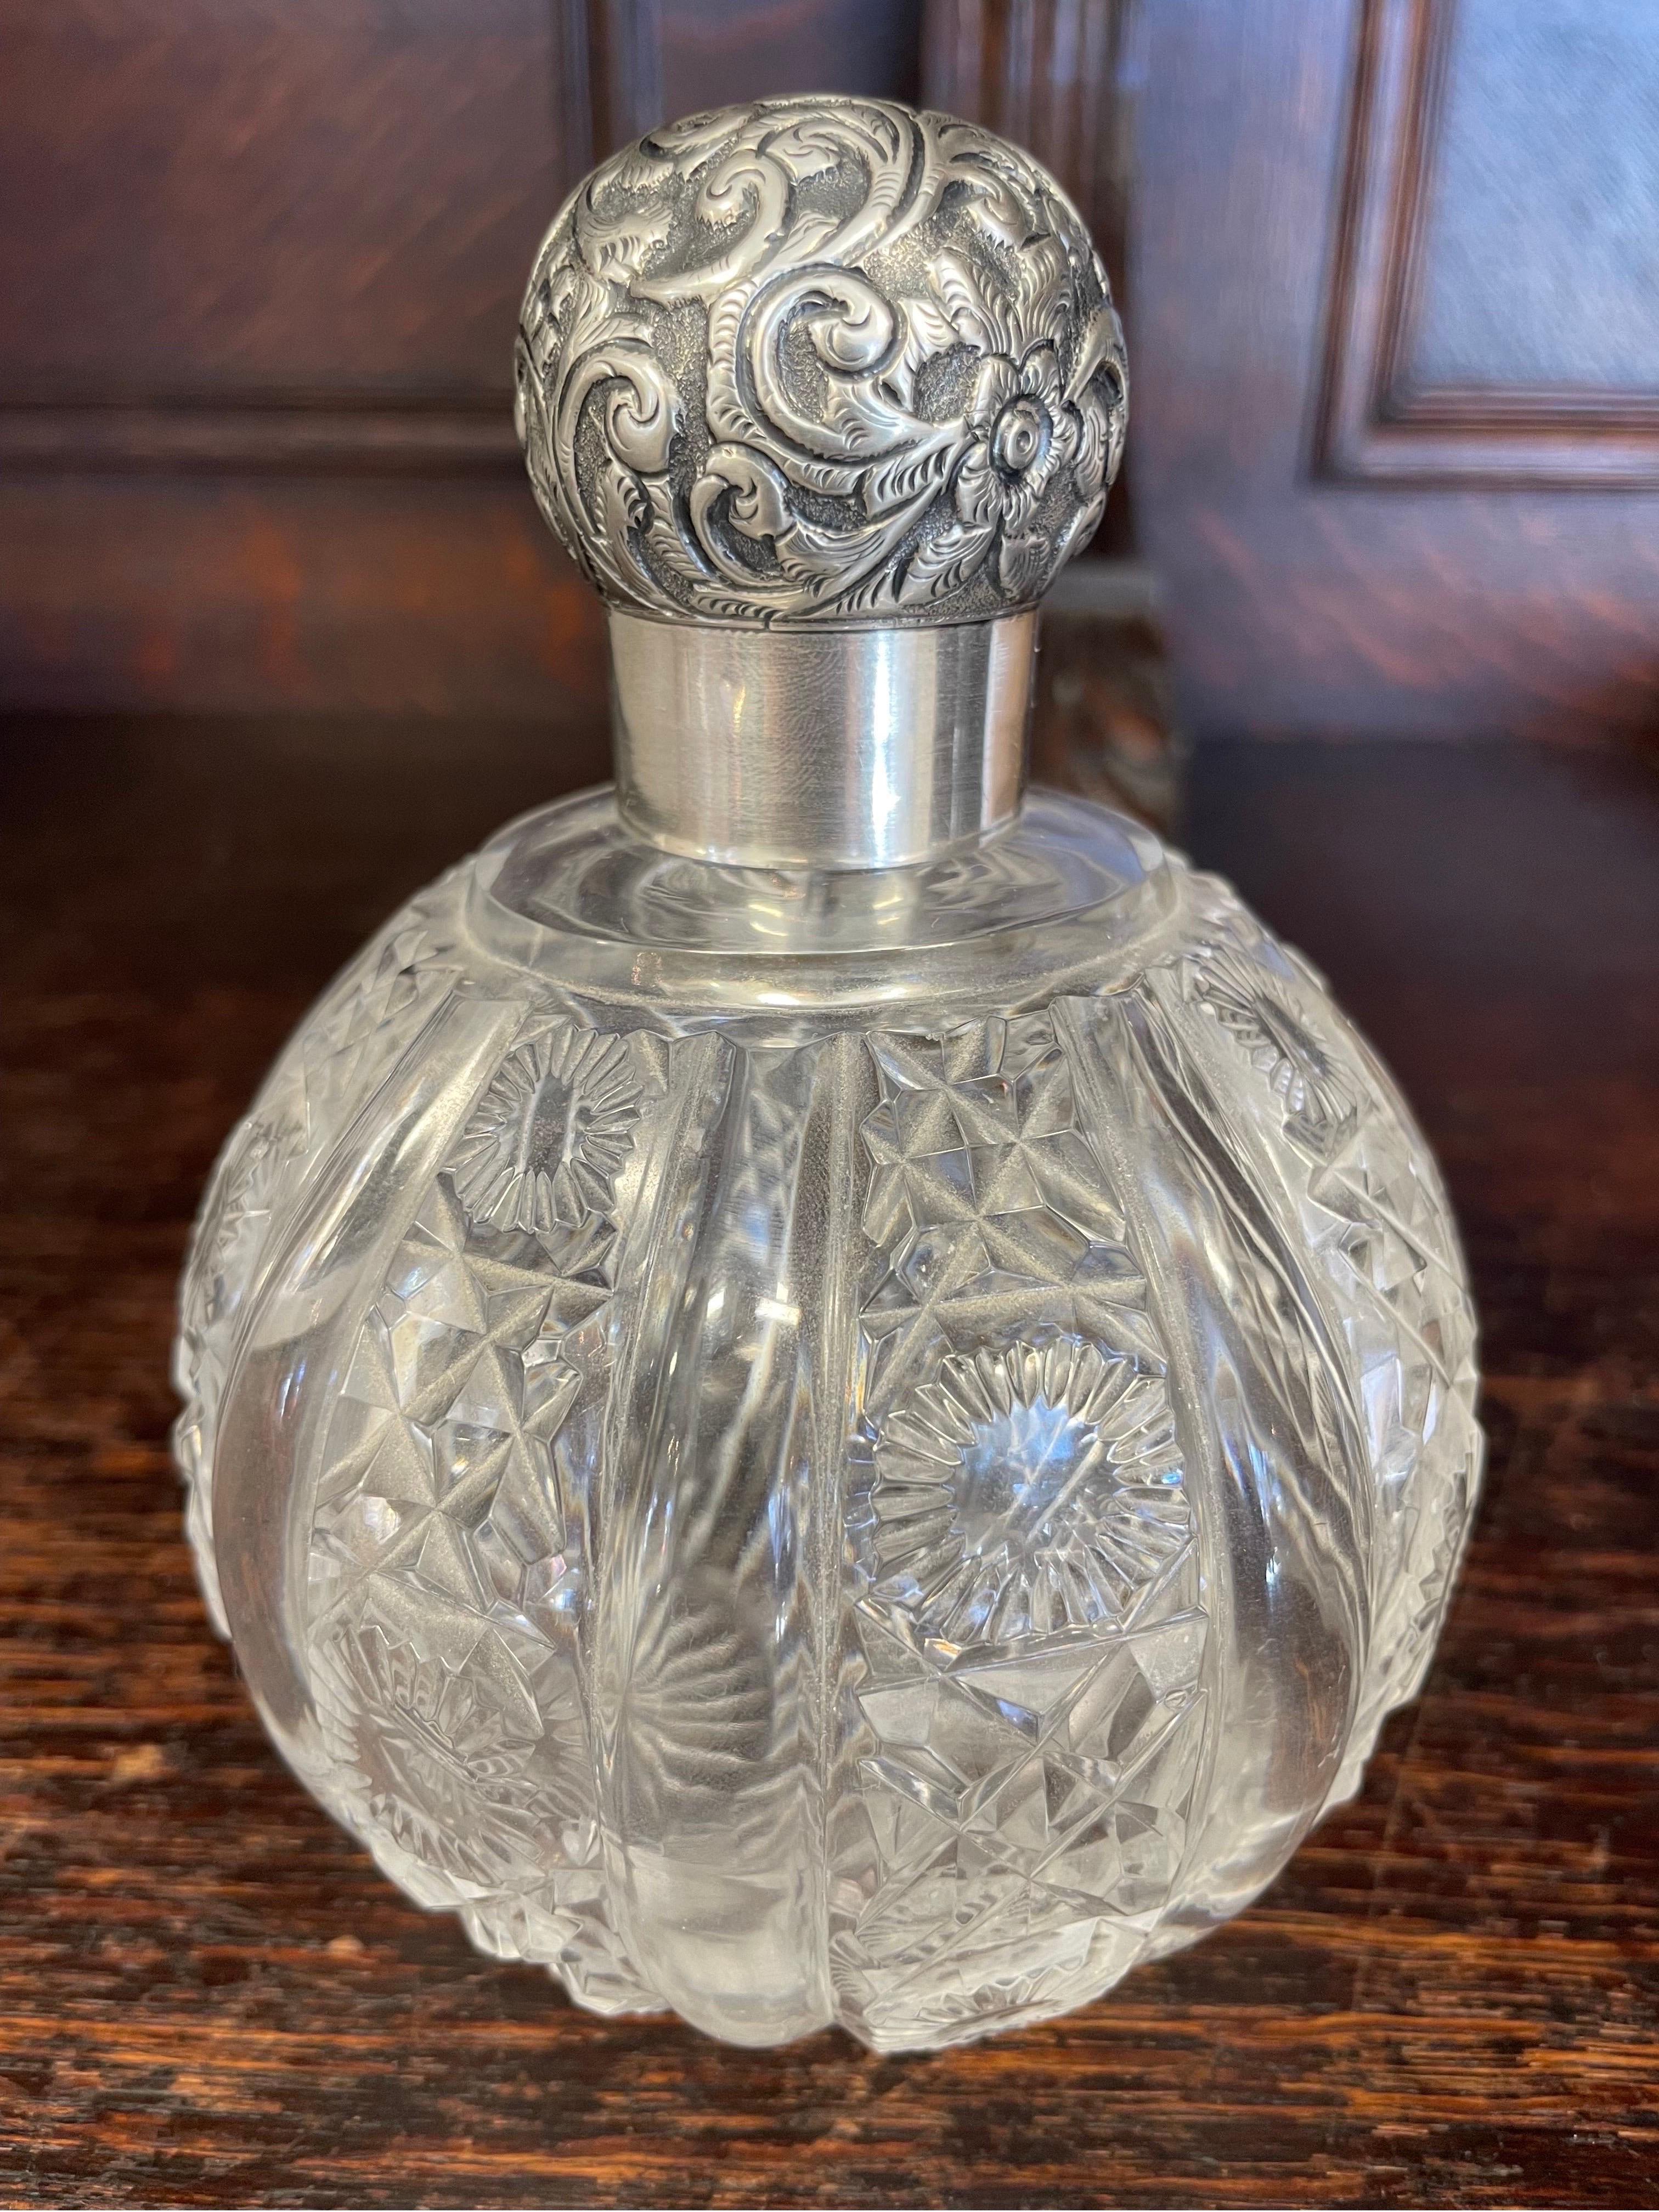 A fine 19th century english sterling silver and cut glass perfume bottle crafted by silversmith Charles May. Fully hallmarked to neck of bottle.